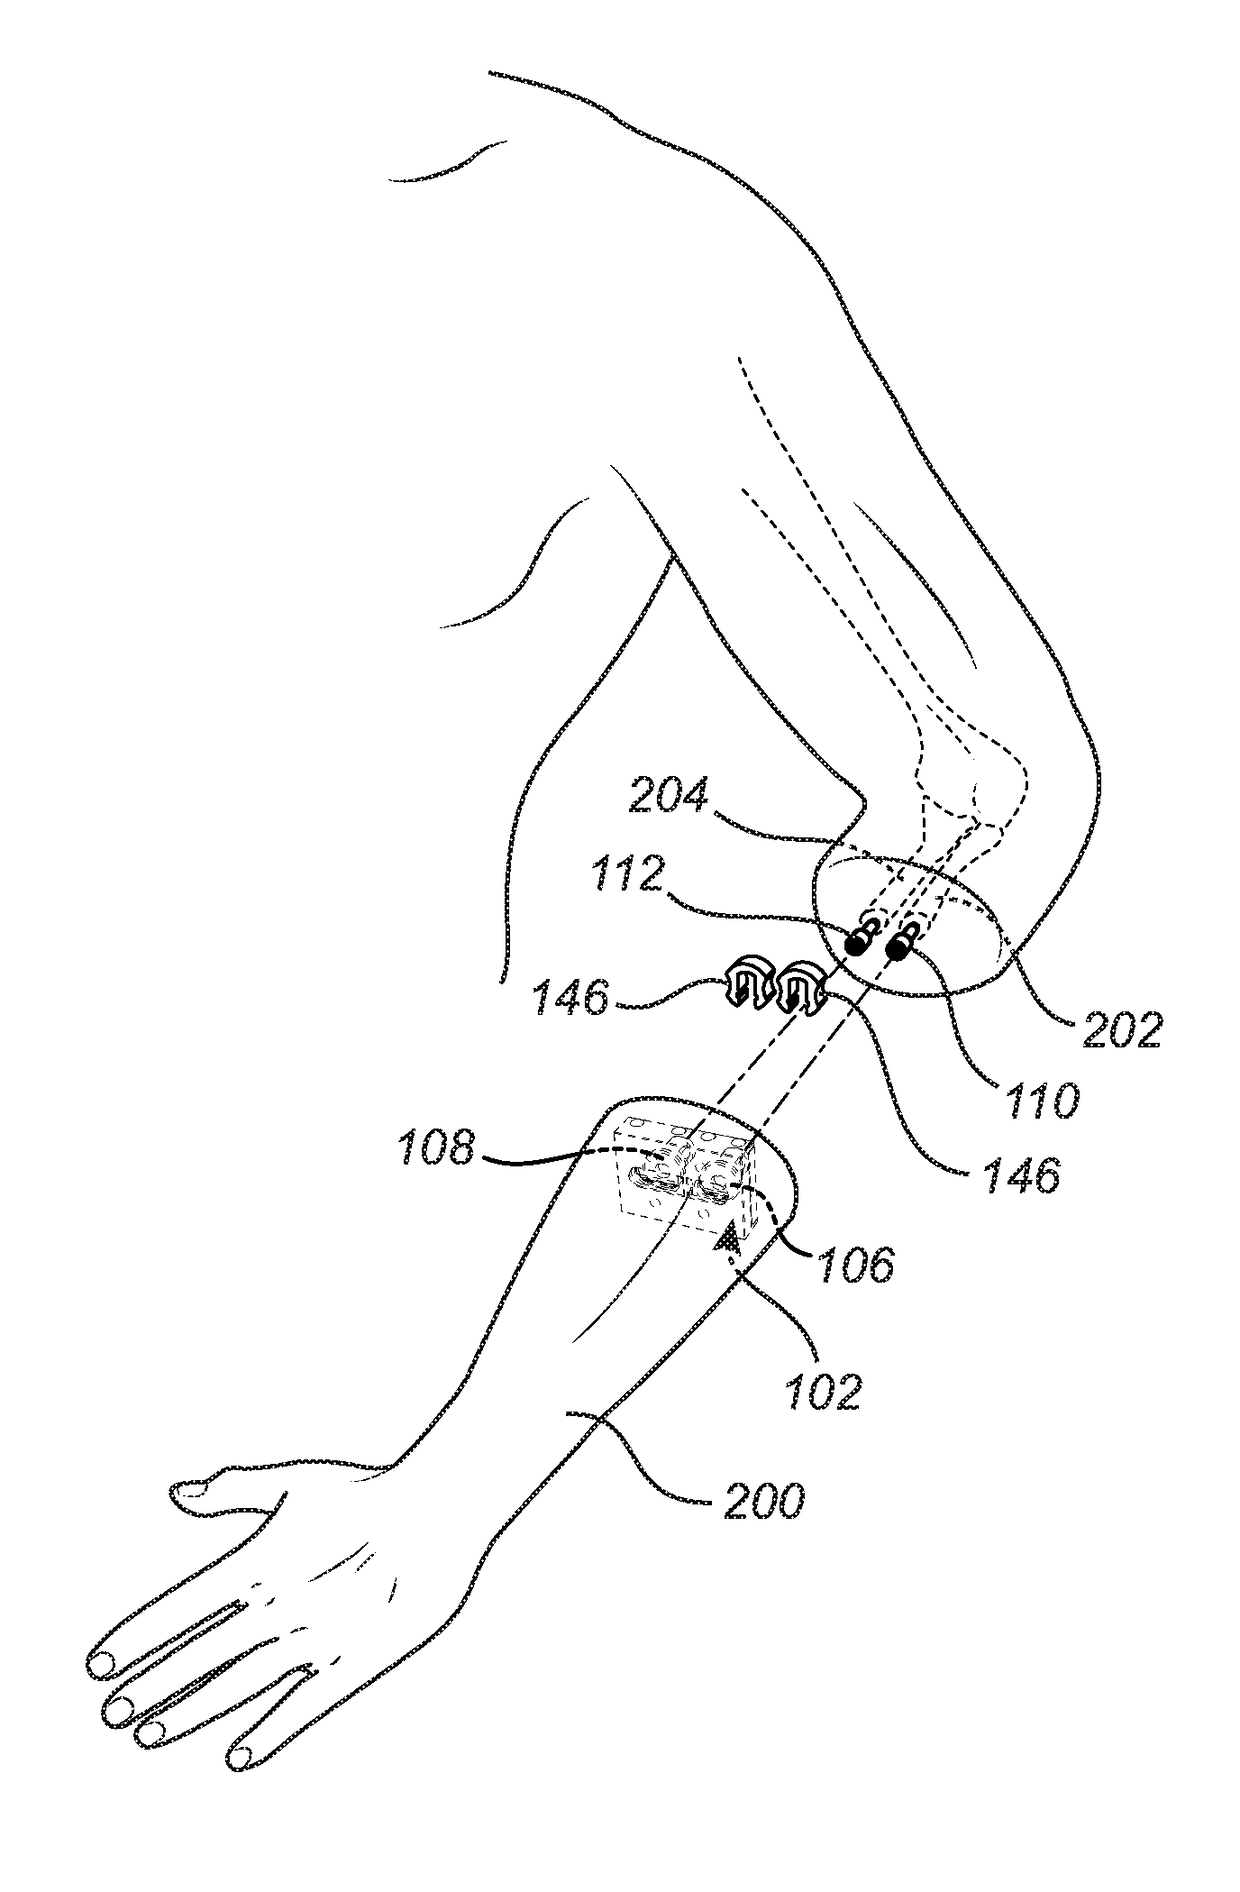 Attachment device allowing natural wrist rotation for osseointegrated prostheses